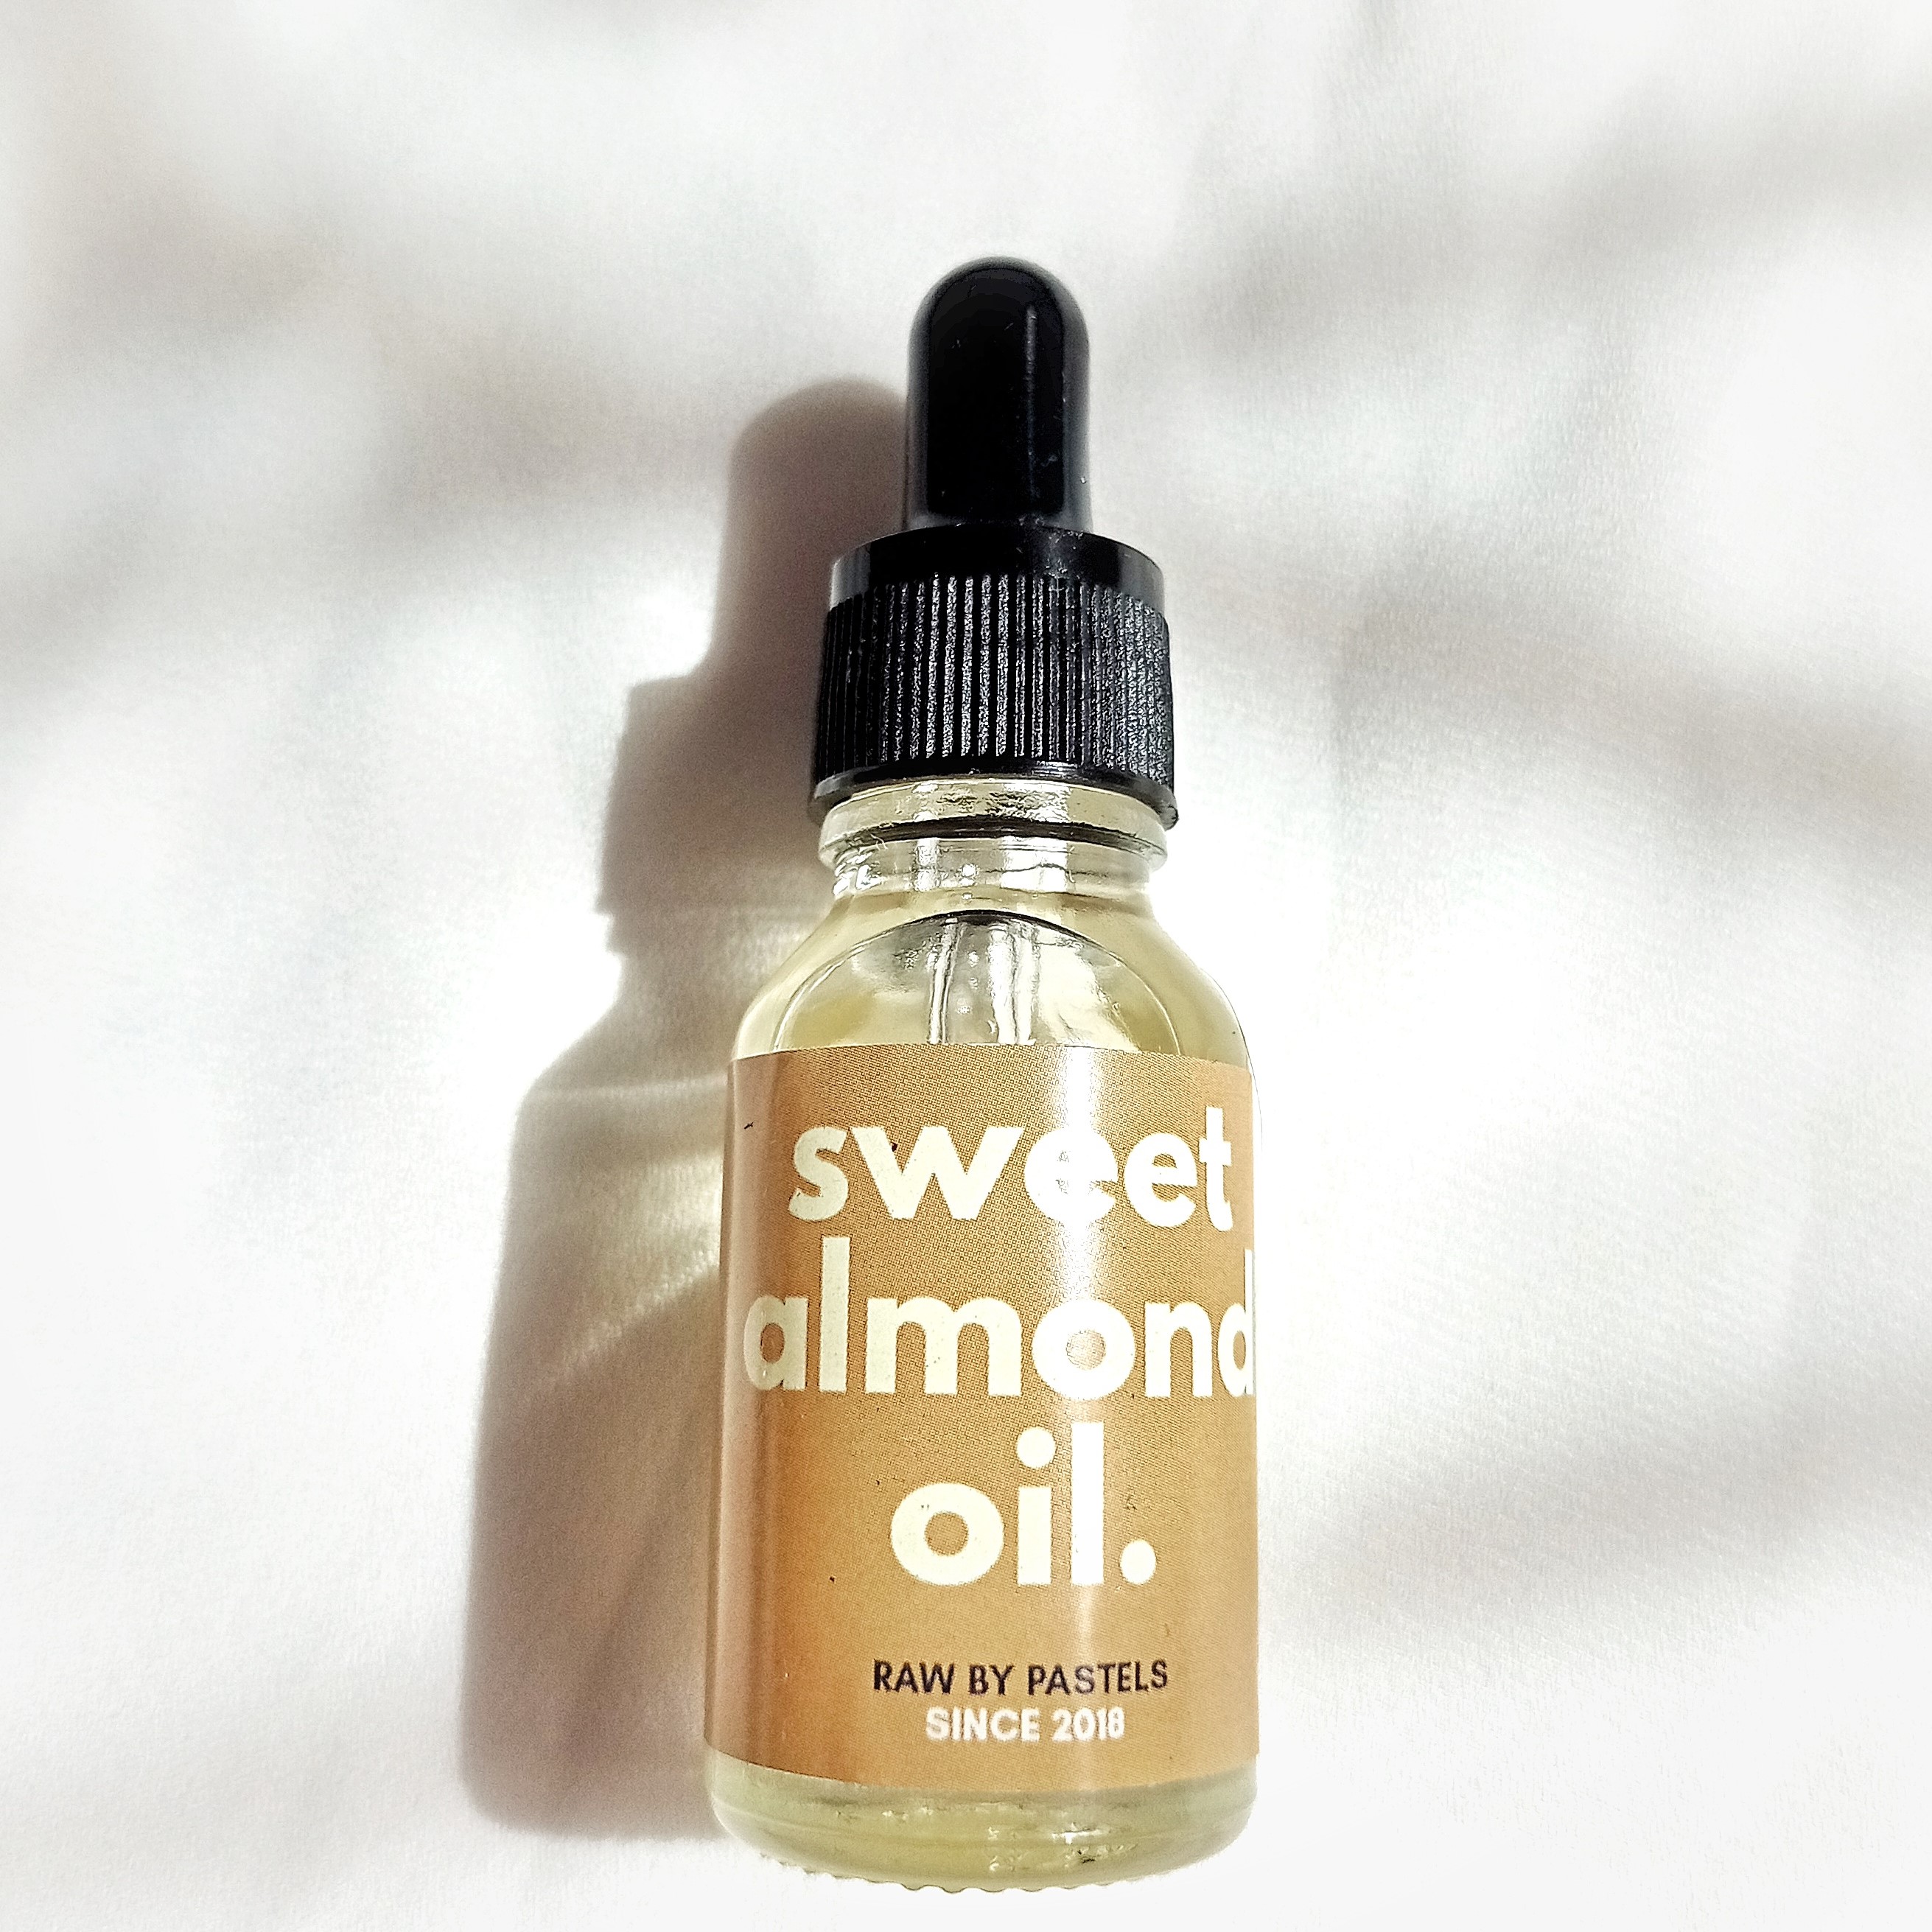 Experiences with Raw by Pastels Sweet Almond Oil by Zyaskinthoughts